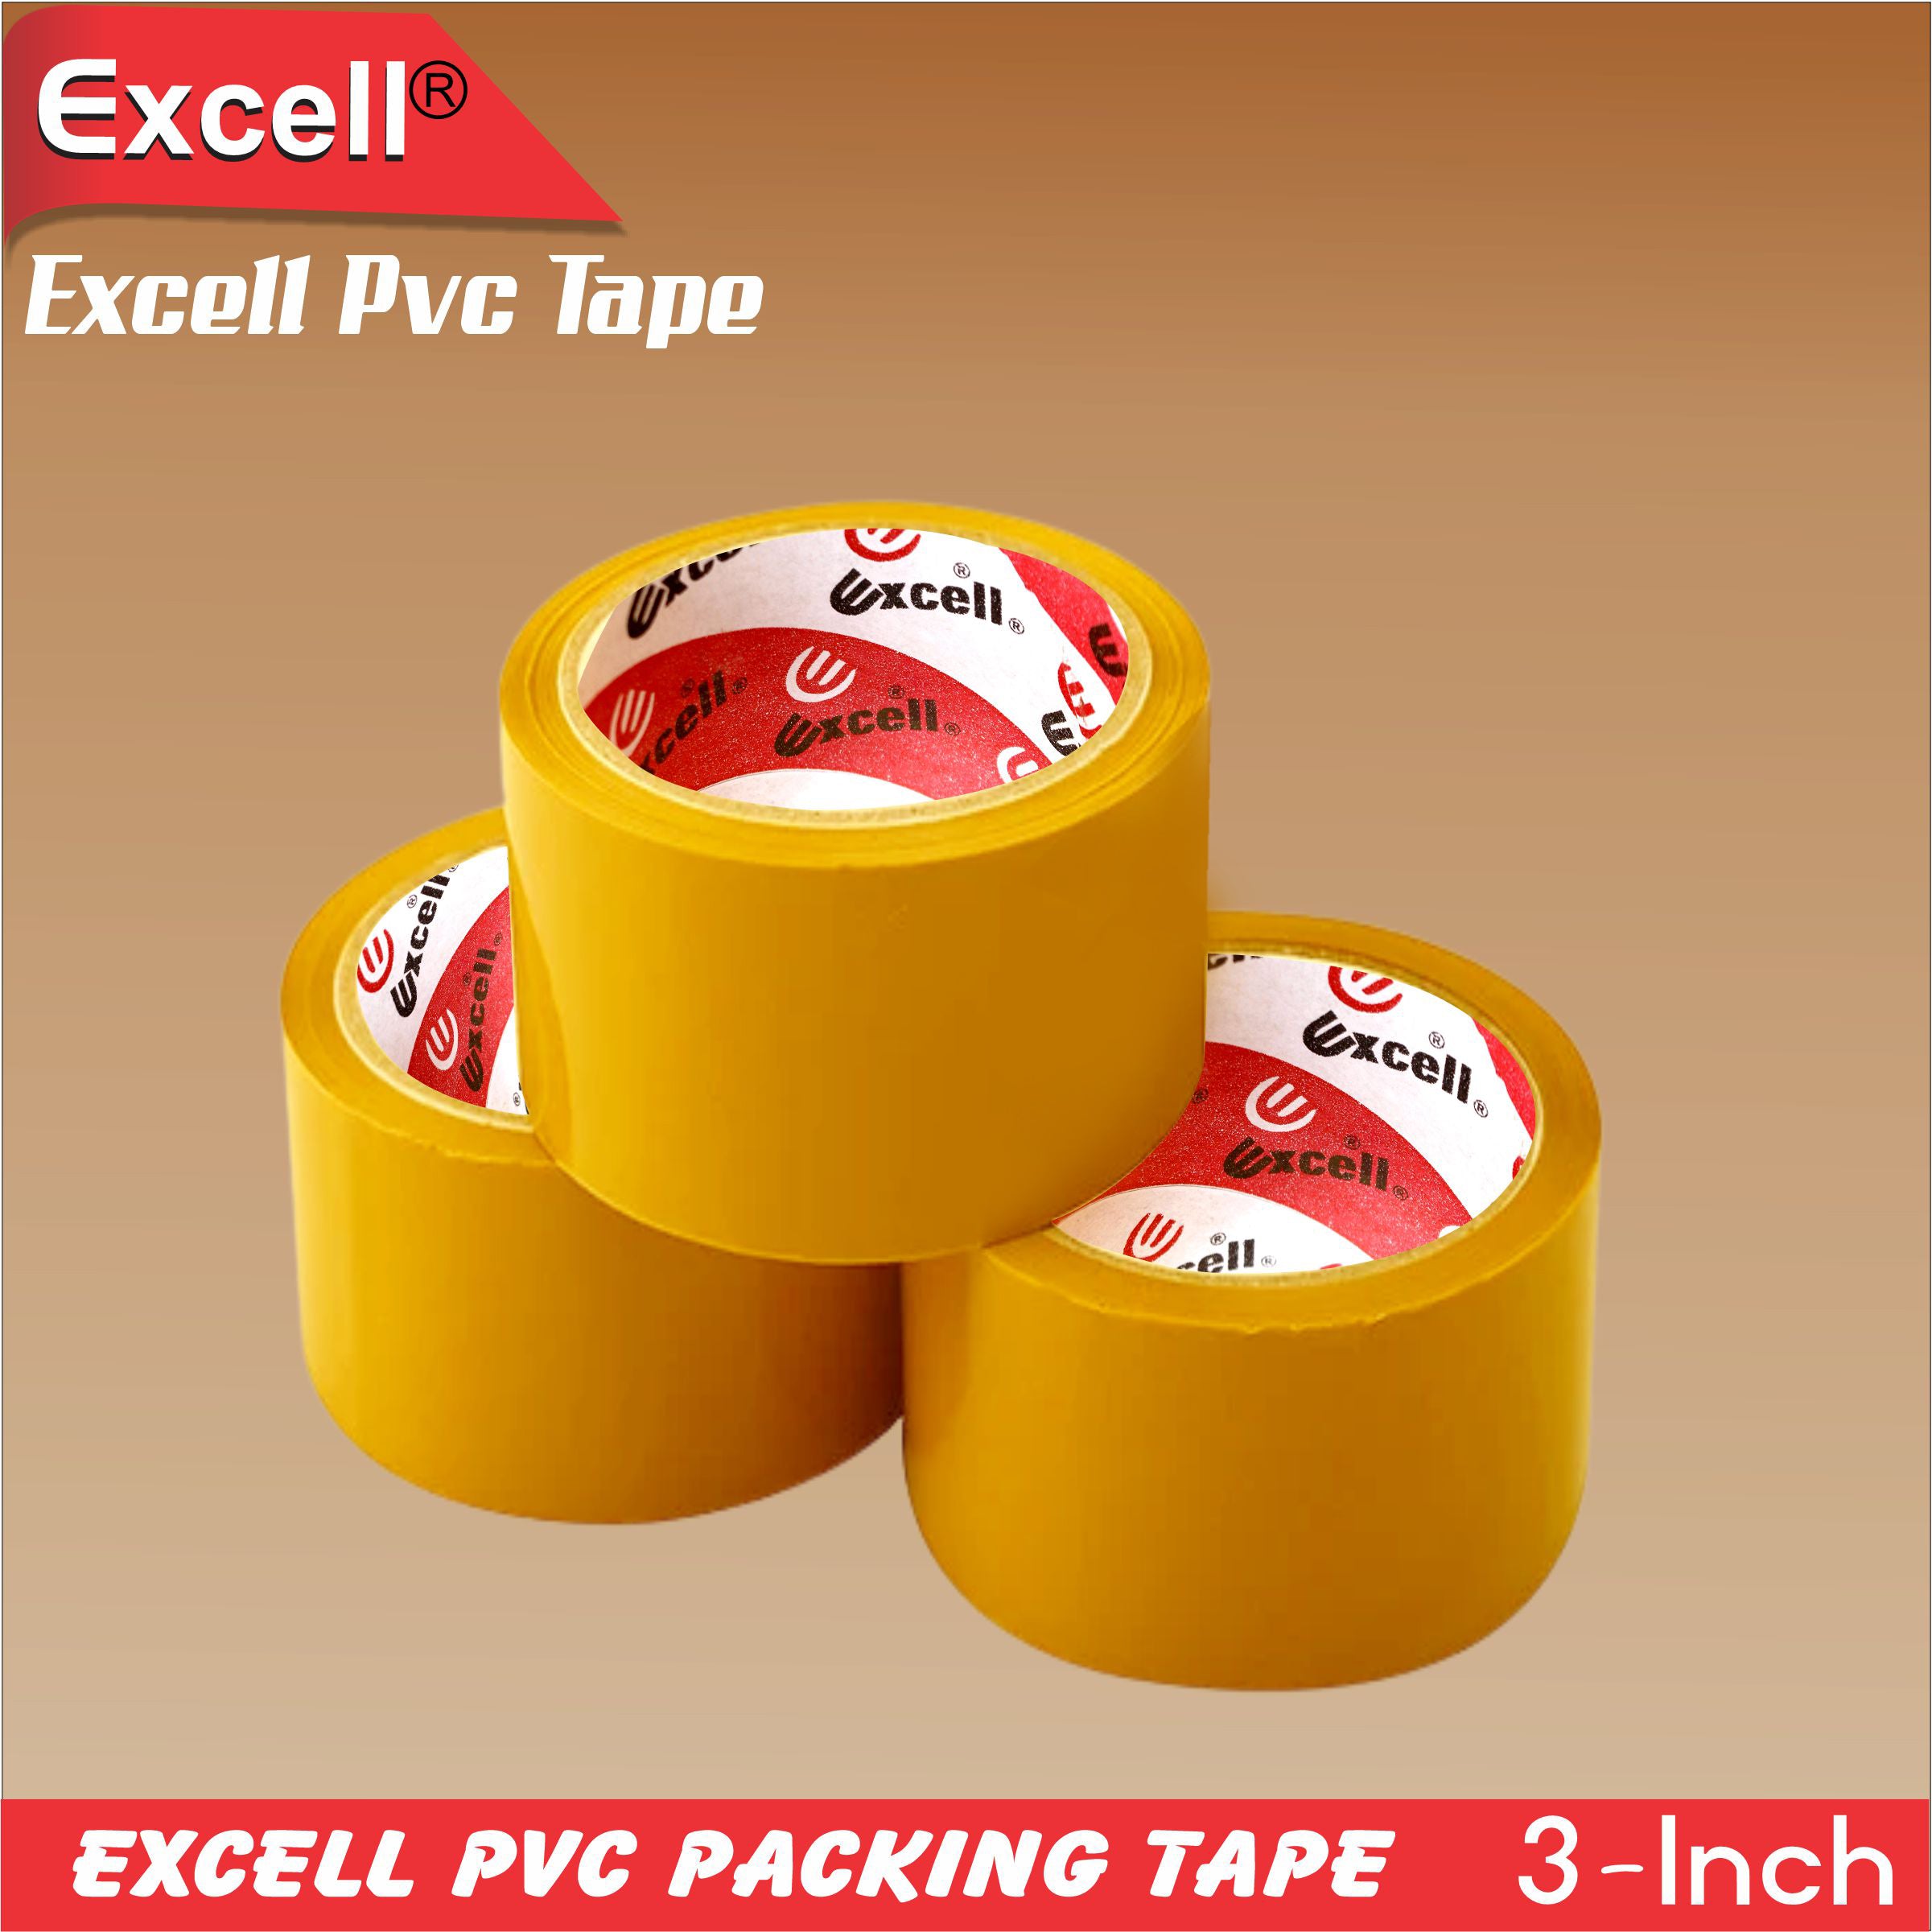 Buy Transparent Heavy Duty Double Sided Silicone Tape Roll in Pakistan